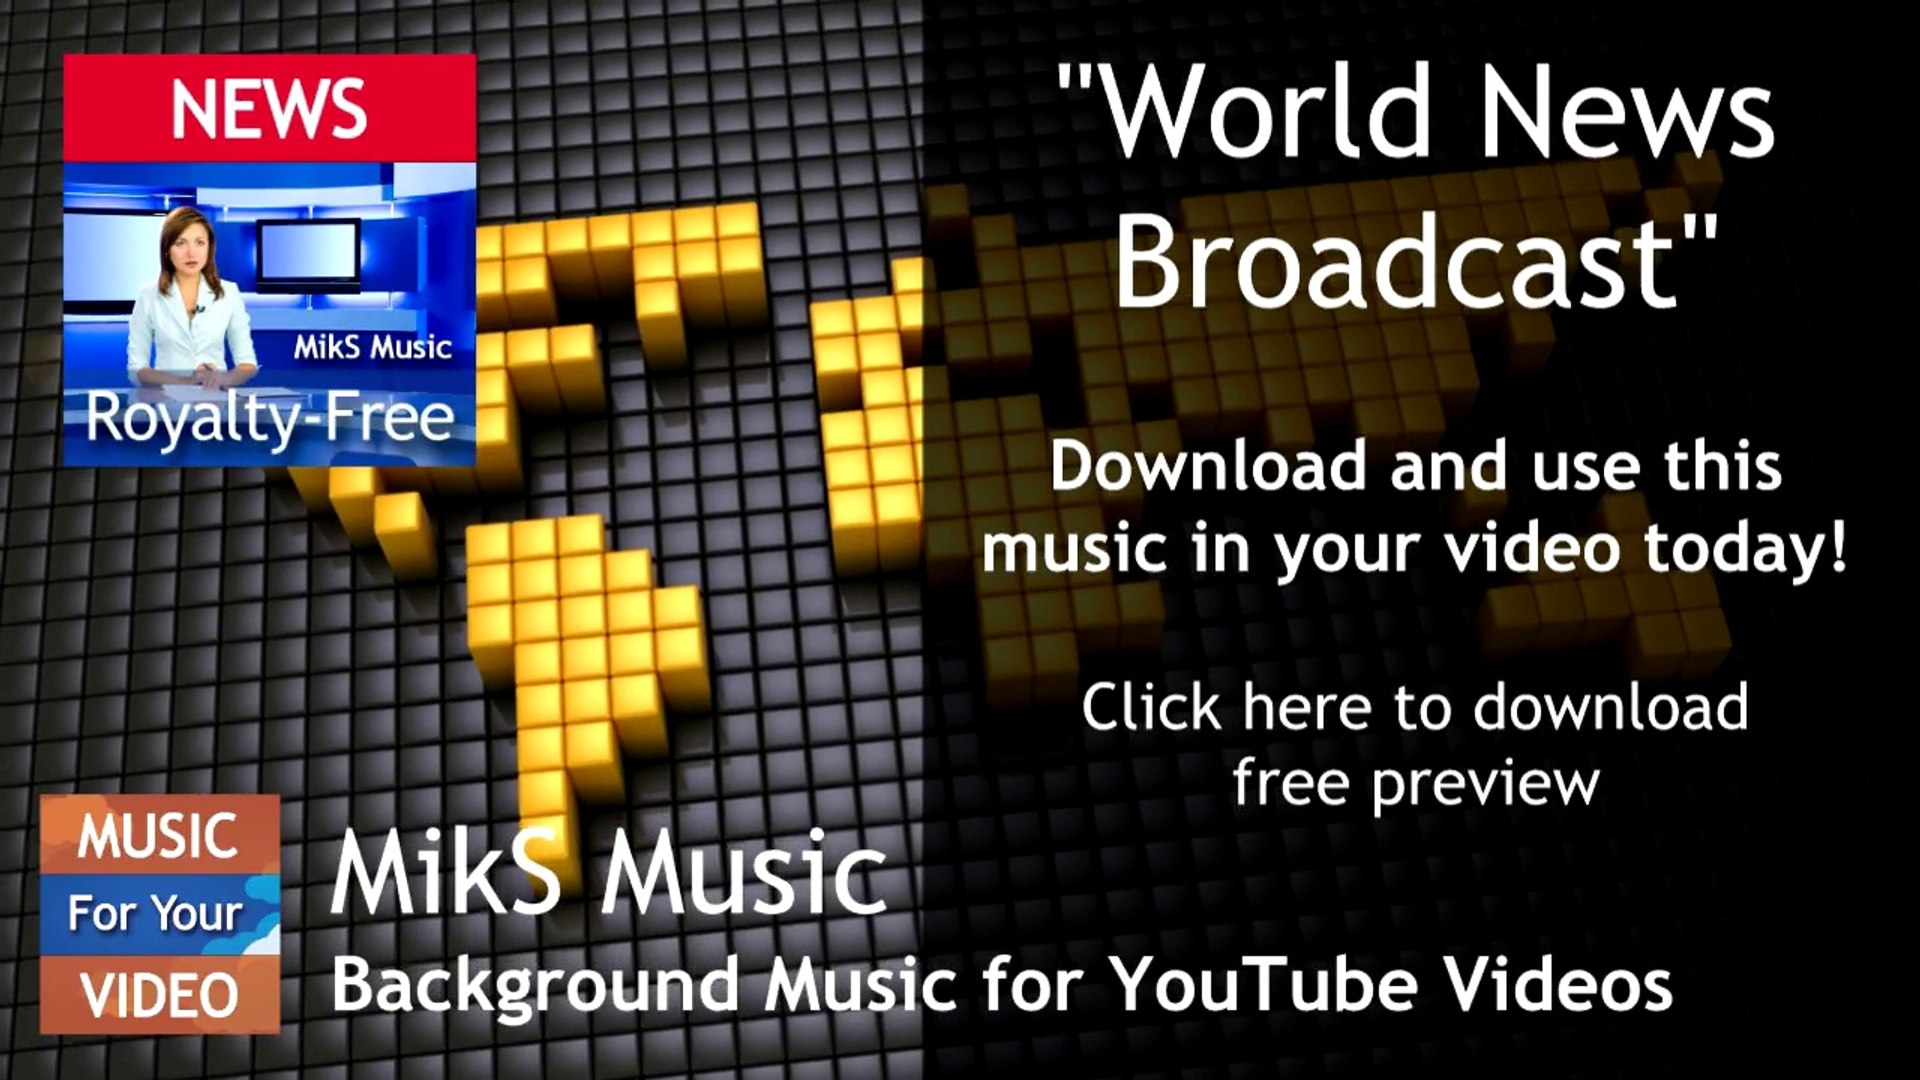 News Broadcast Background Music Royalty Free Download - video Dailymotion